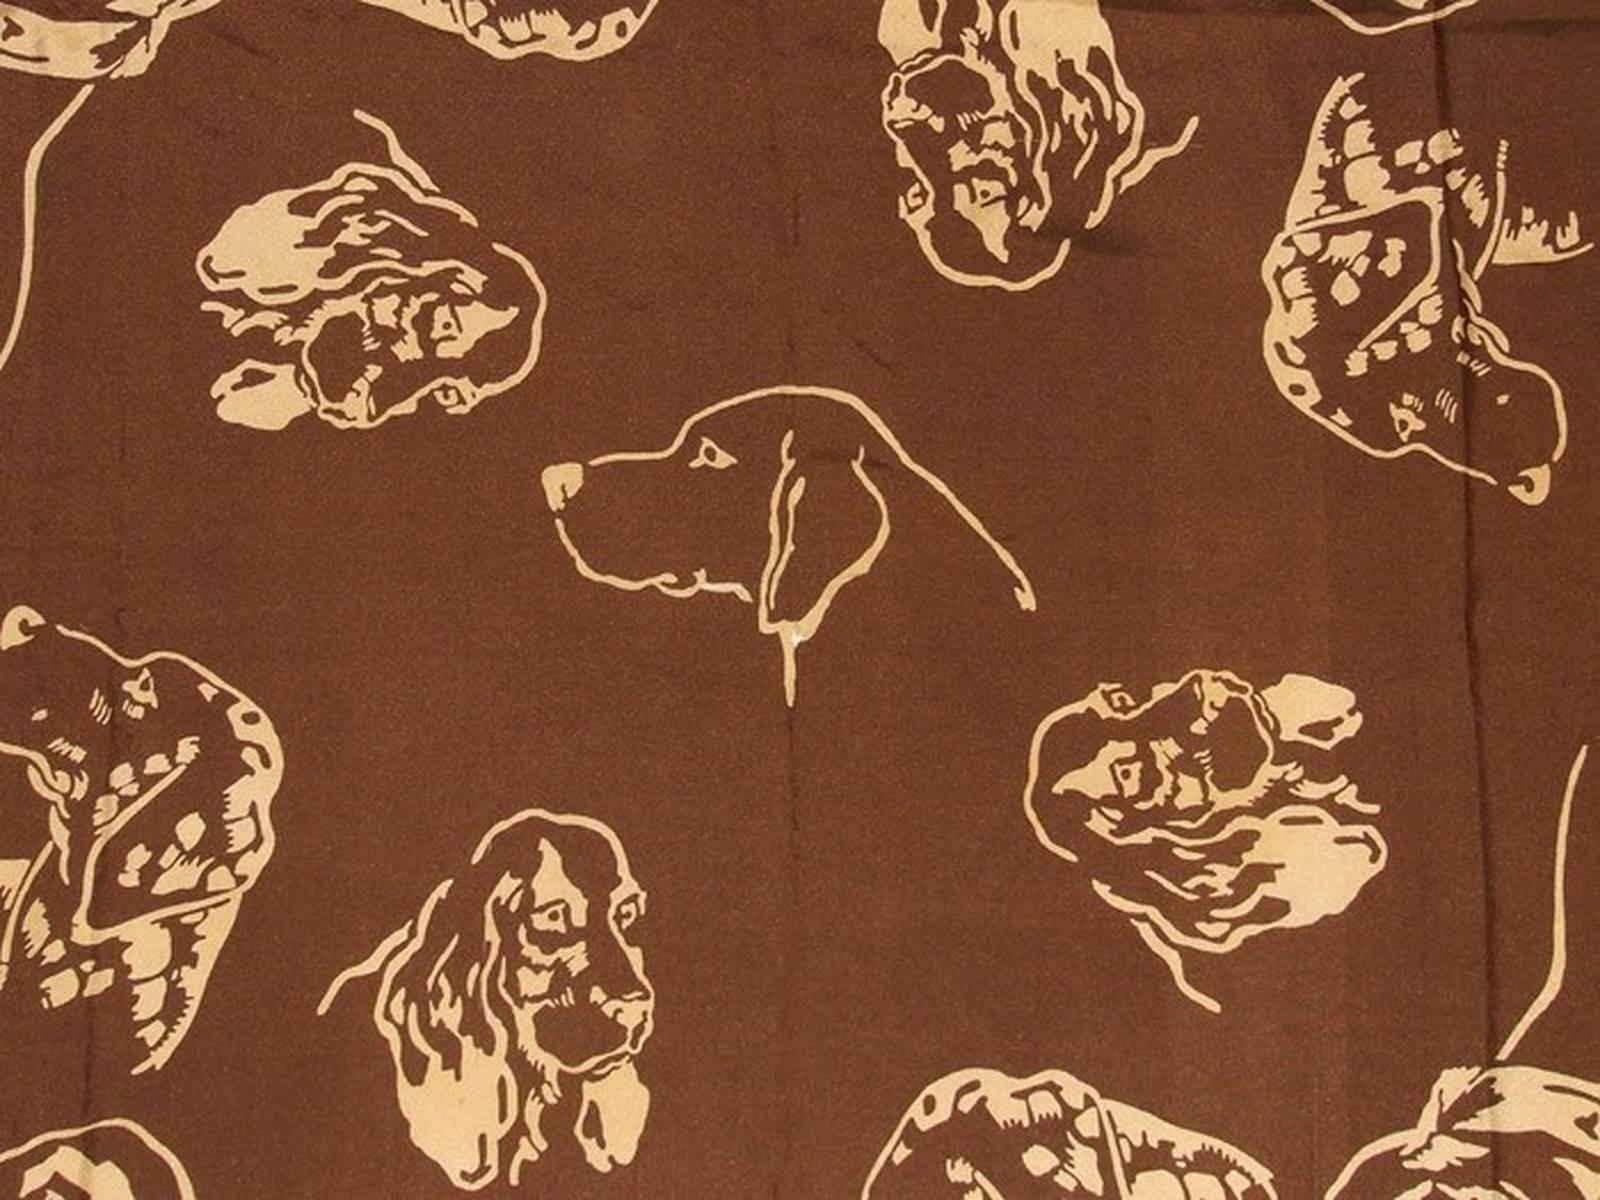 Amazing Authentic Hermès Scarf

Pattern: Cocker Heads

Vintage scarf designed by Jacques Nam in 1938

One of the rarest, a GRAIL

Made in France 

Made of 100% Silk

Colorways: Brown Background, Beige Dogs

